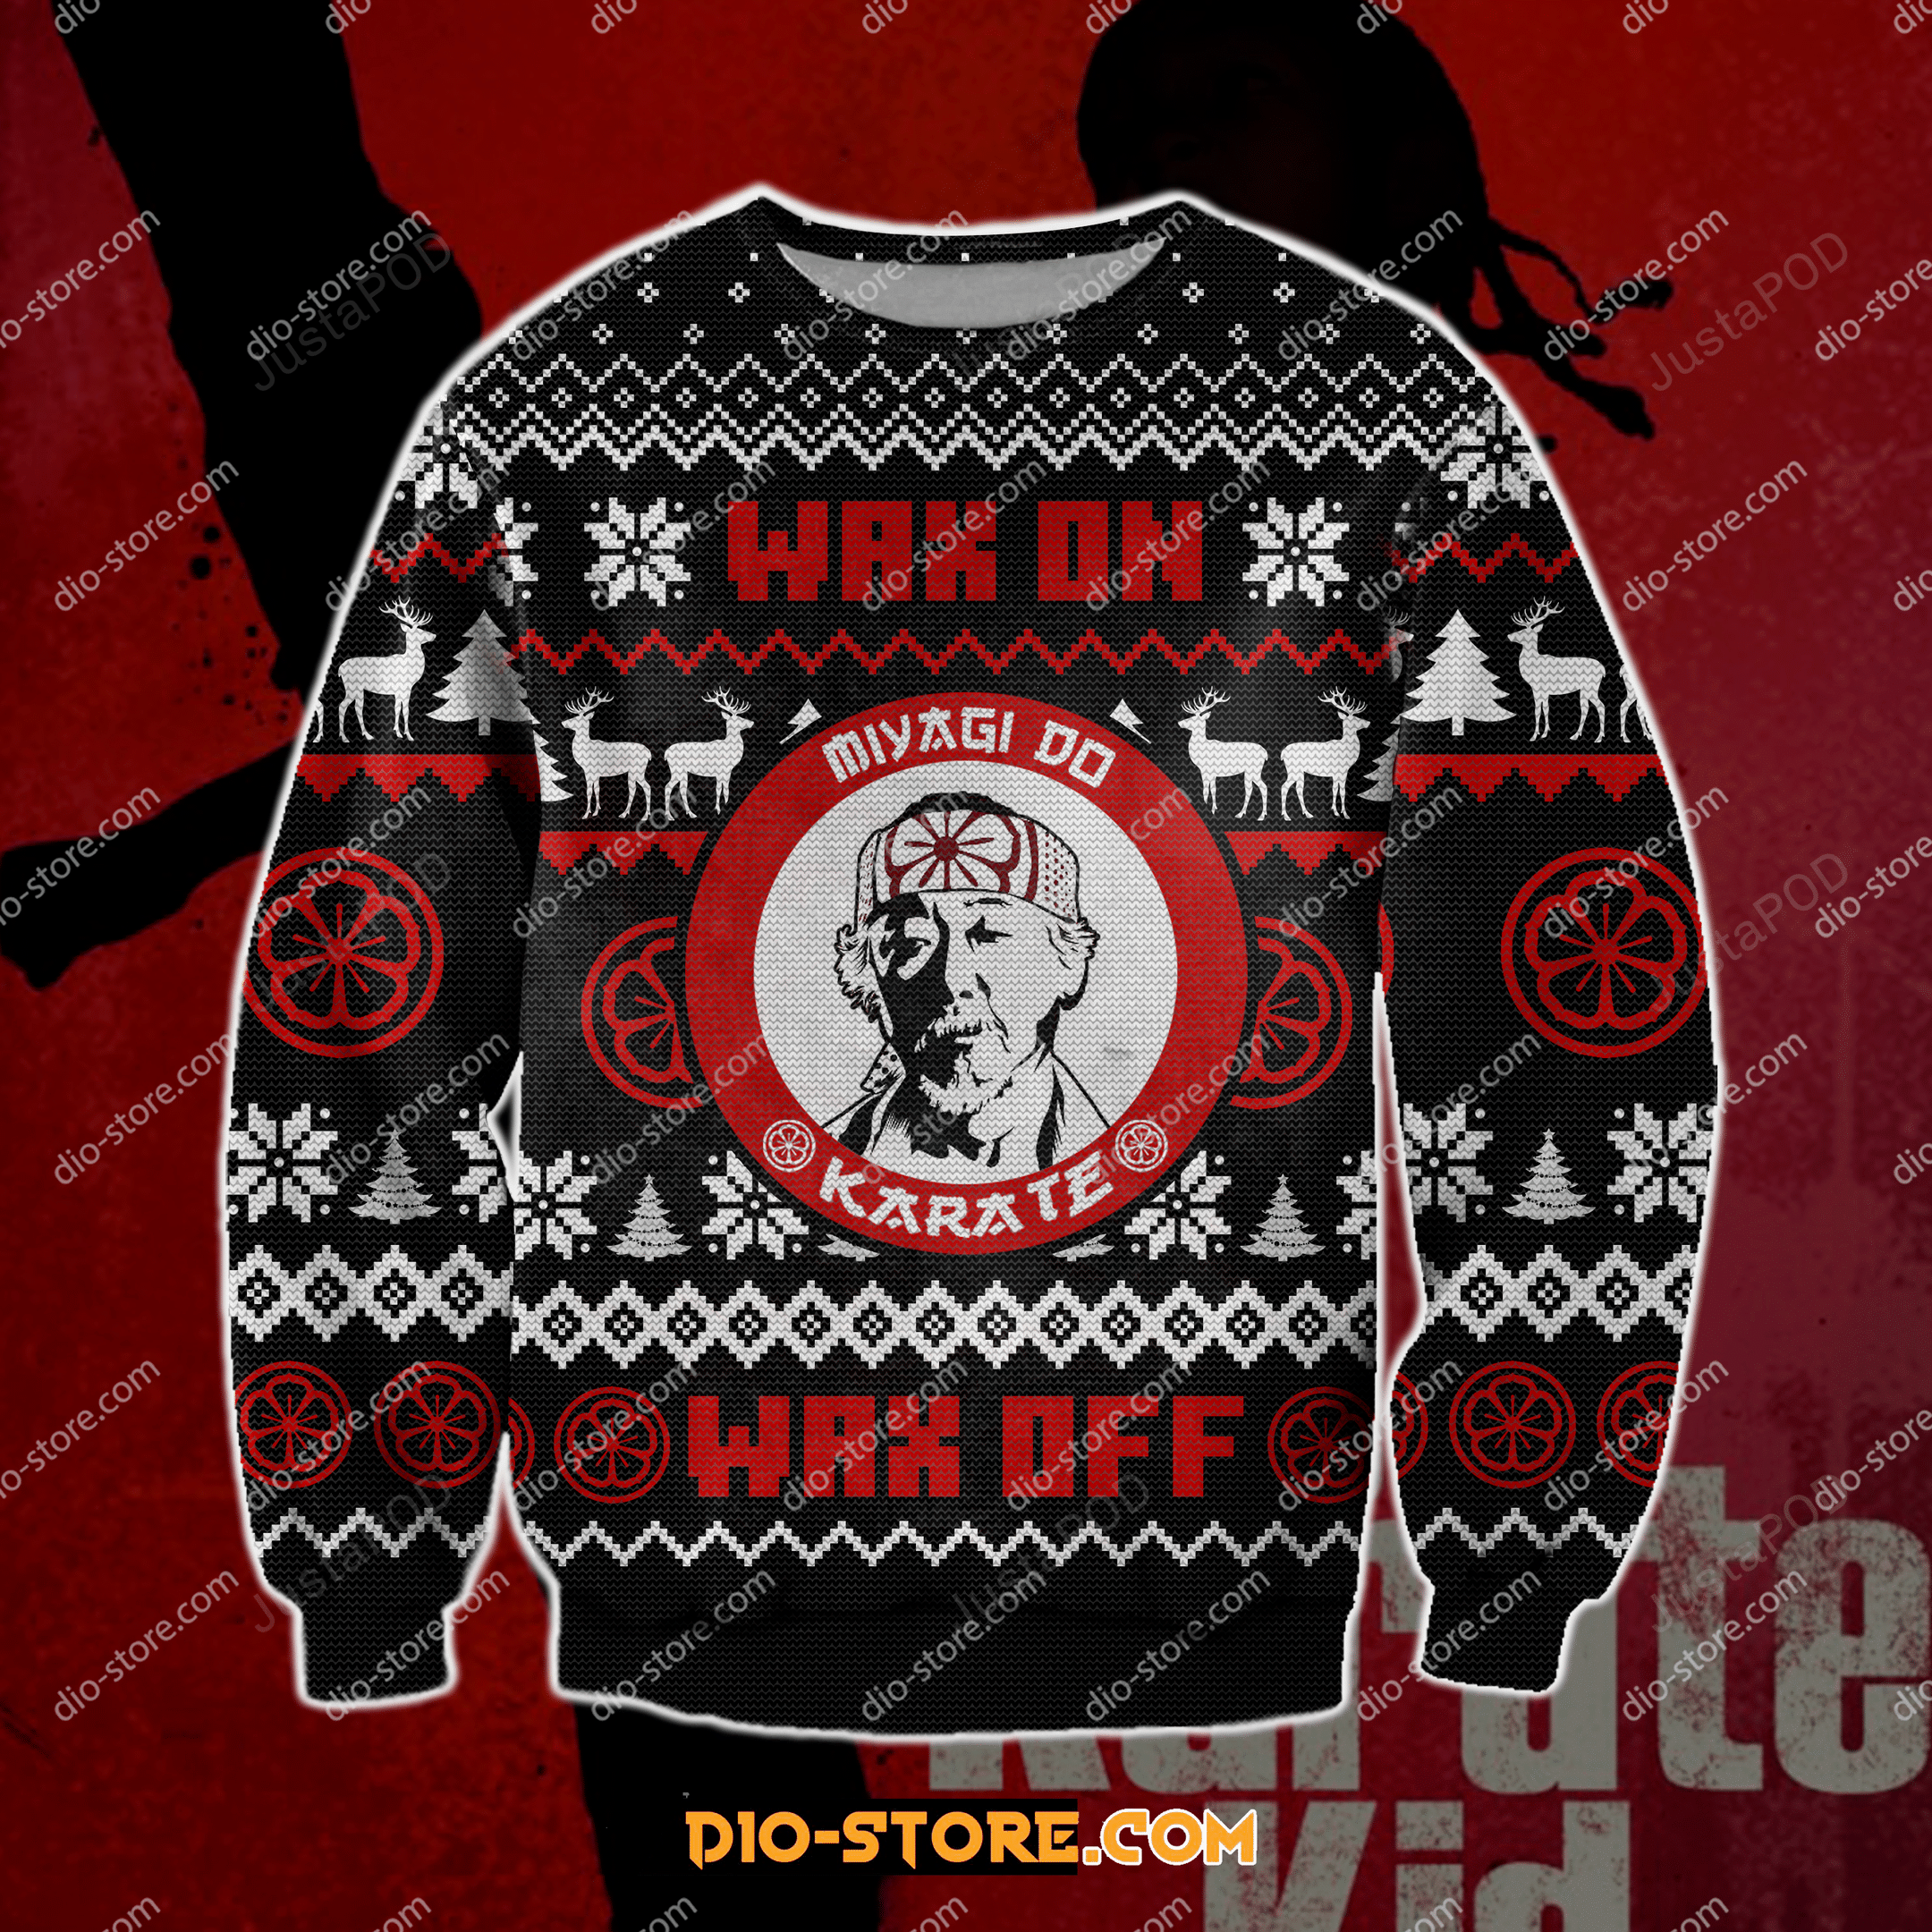 The Karate Kid Knitting Pattern Ugly Sweater Ugly Sweater Christmas